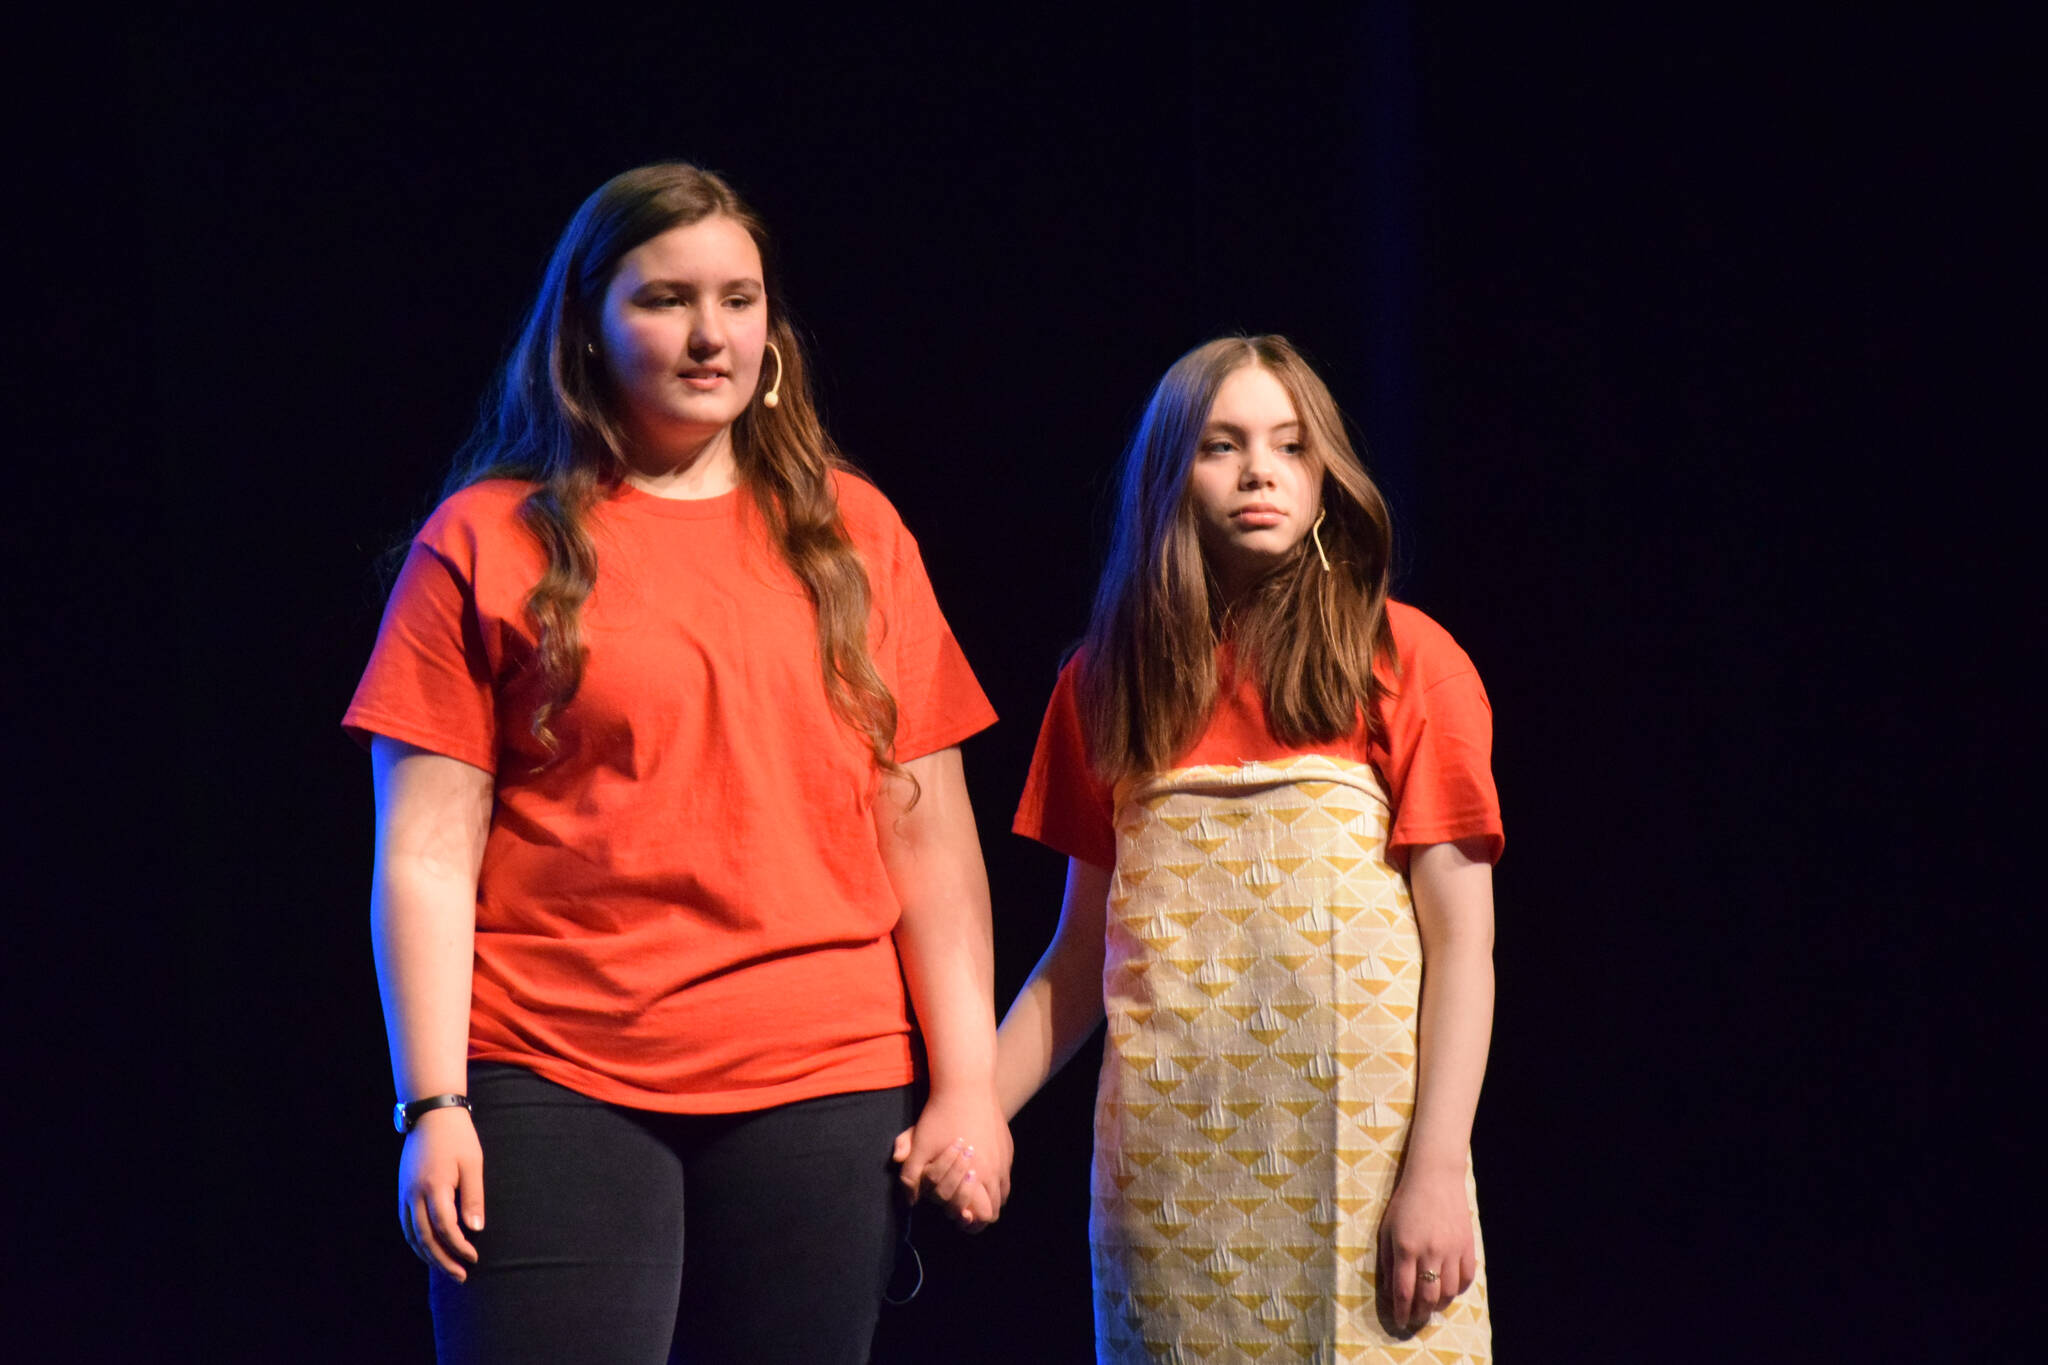 Emerie Mallard, left, and Mylee Yeoman perform “Moana” during a dress rehearsal at the Renee C. Henderson Auditorium in Kenai, Alaska, on Wednesday, April 27, 2022. (Camille Botello/Peninsula Clarion)